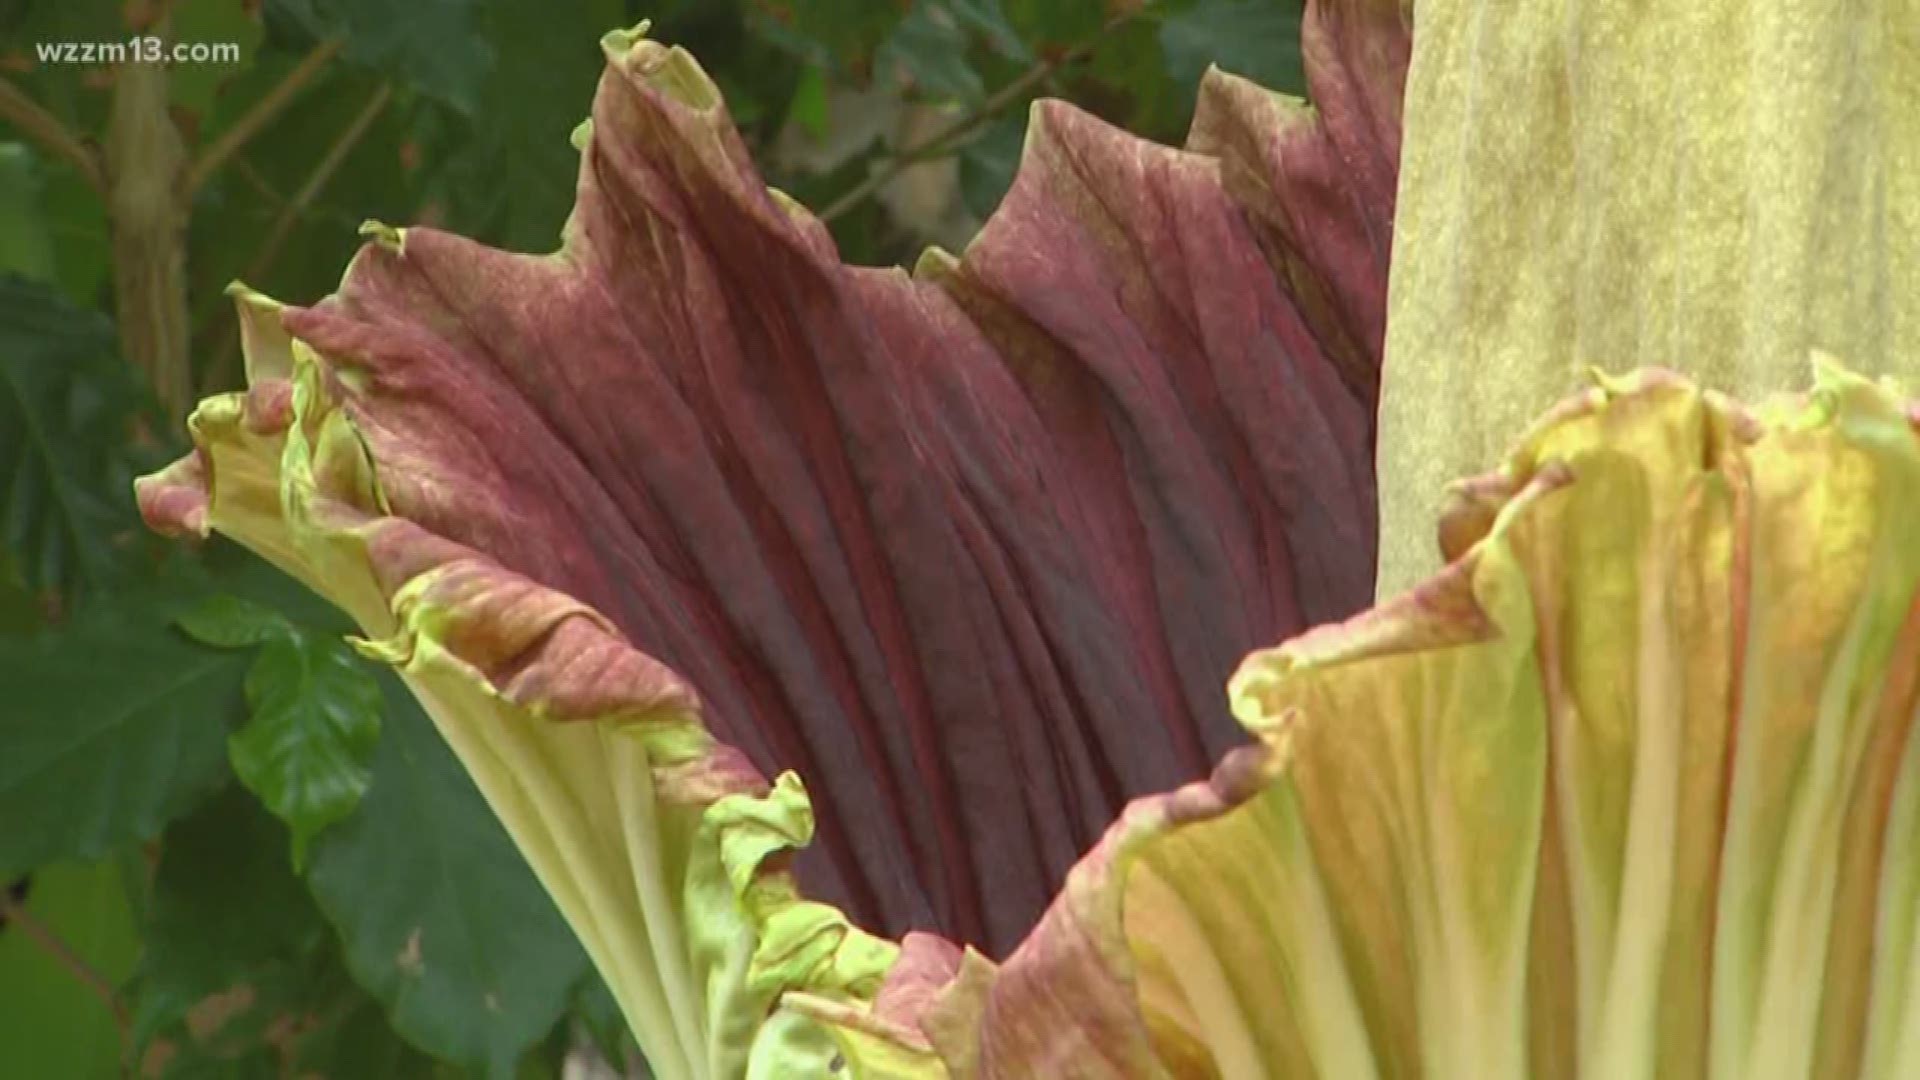 Corpse flower starts to open up at Meijer Gardens